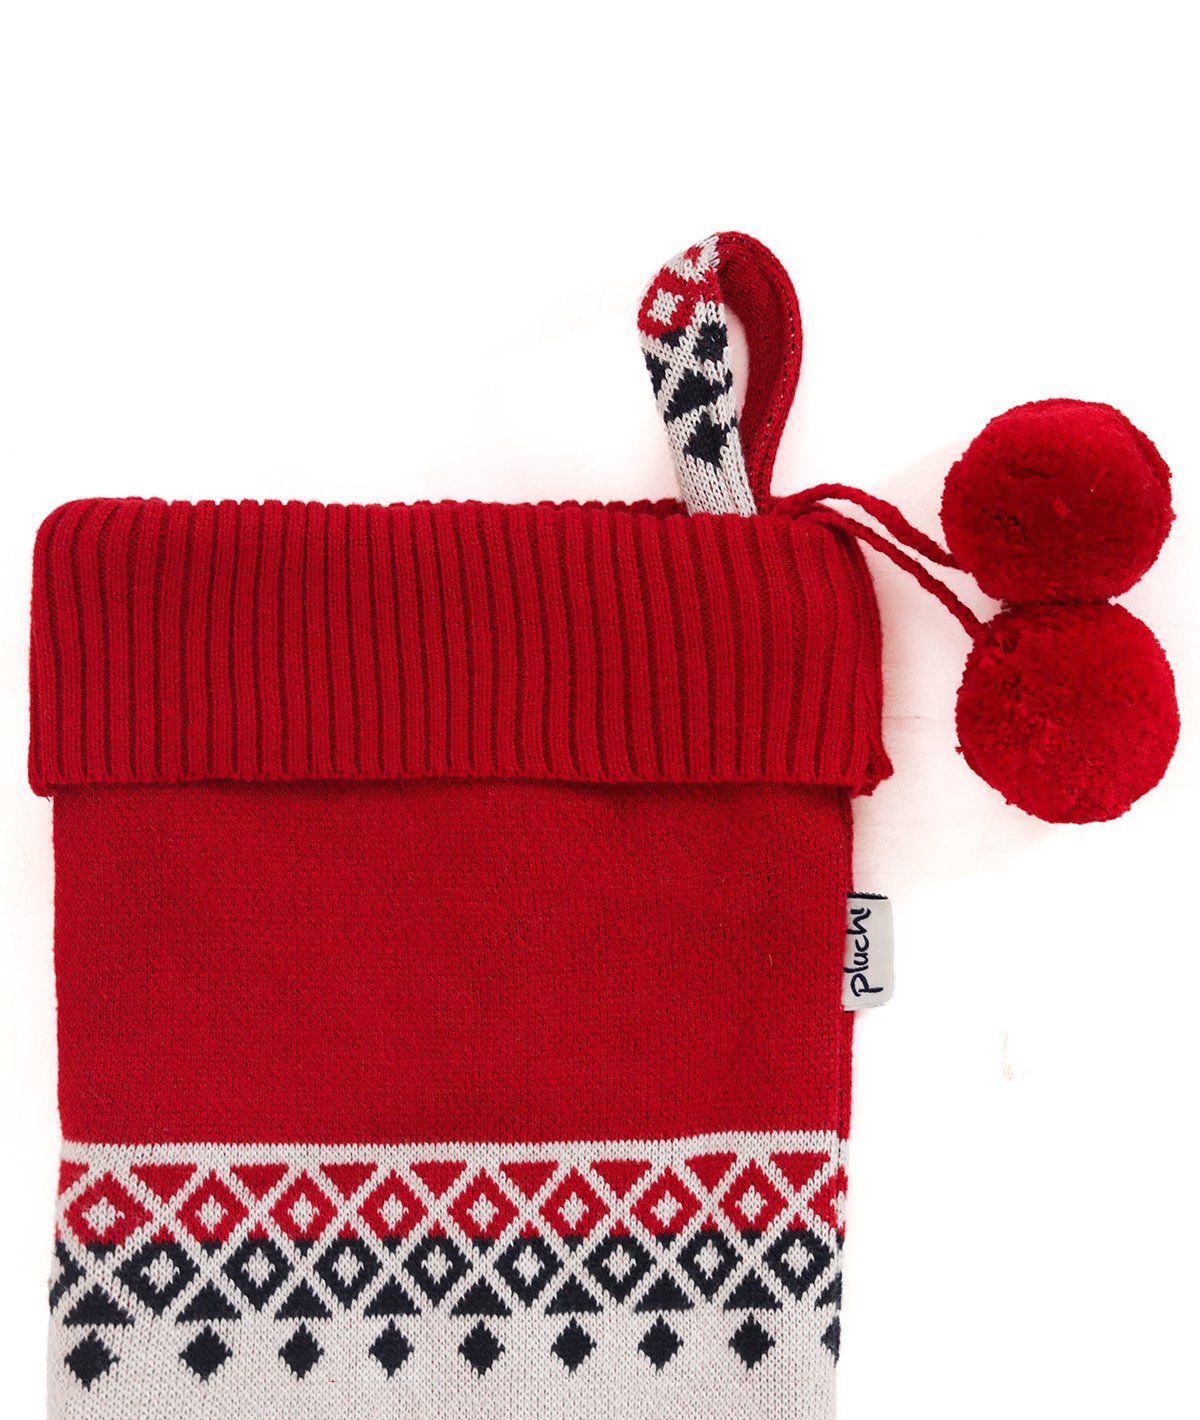 Santa's Reindeer - Red & Natural Cotton Knitted Christmas Decorative Stocking